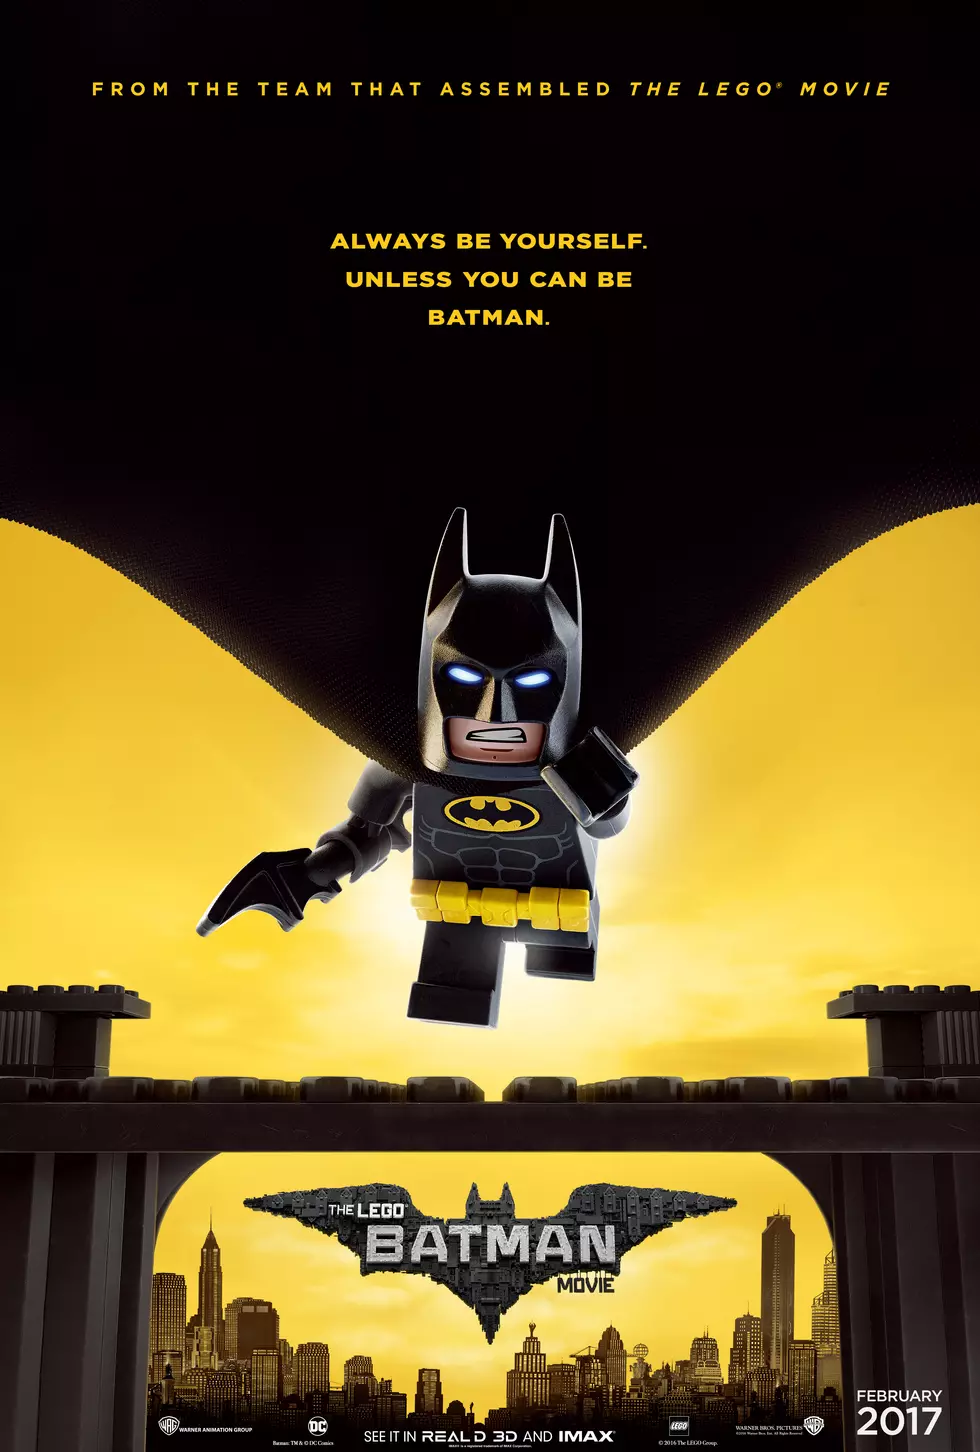 Celebrate Batman Day With a New Poster for ‘The LEGO Batman Movie’